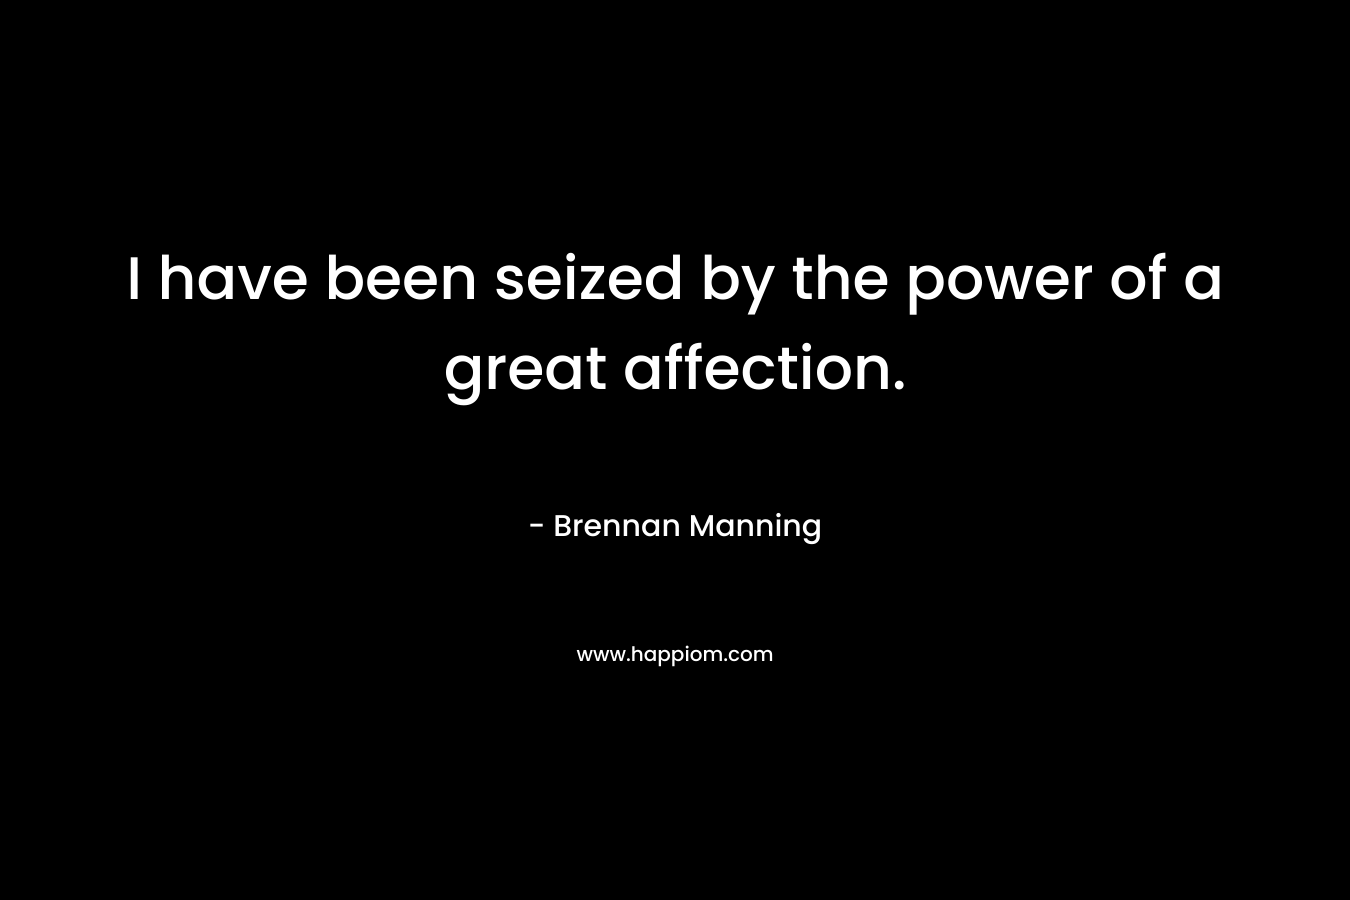 I have been seized by the power of a great affection. – Brennan Manning